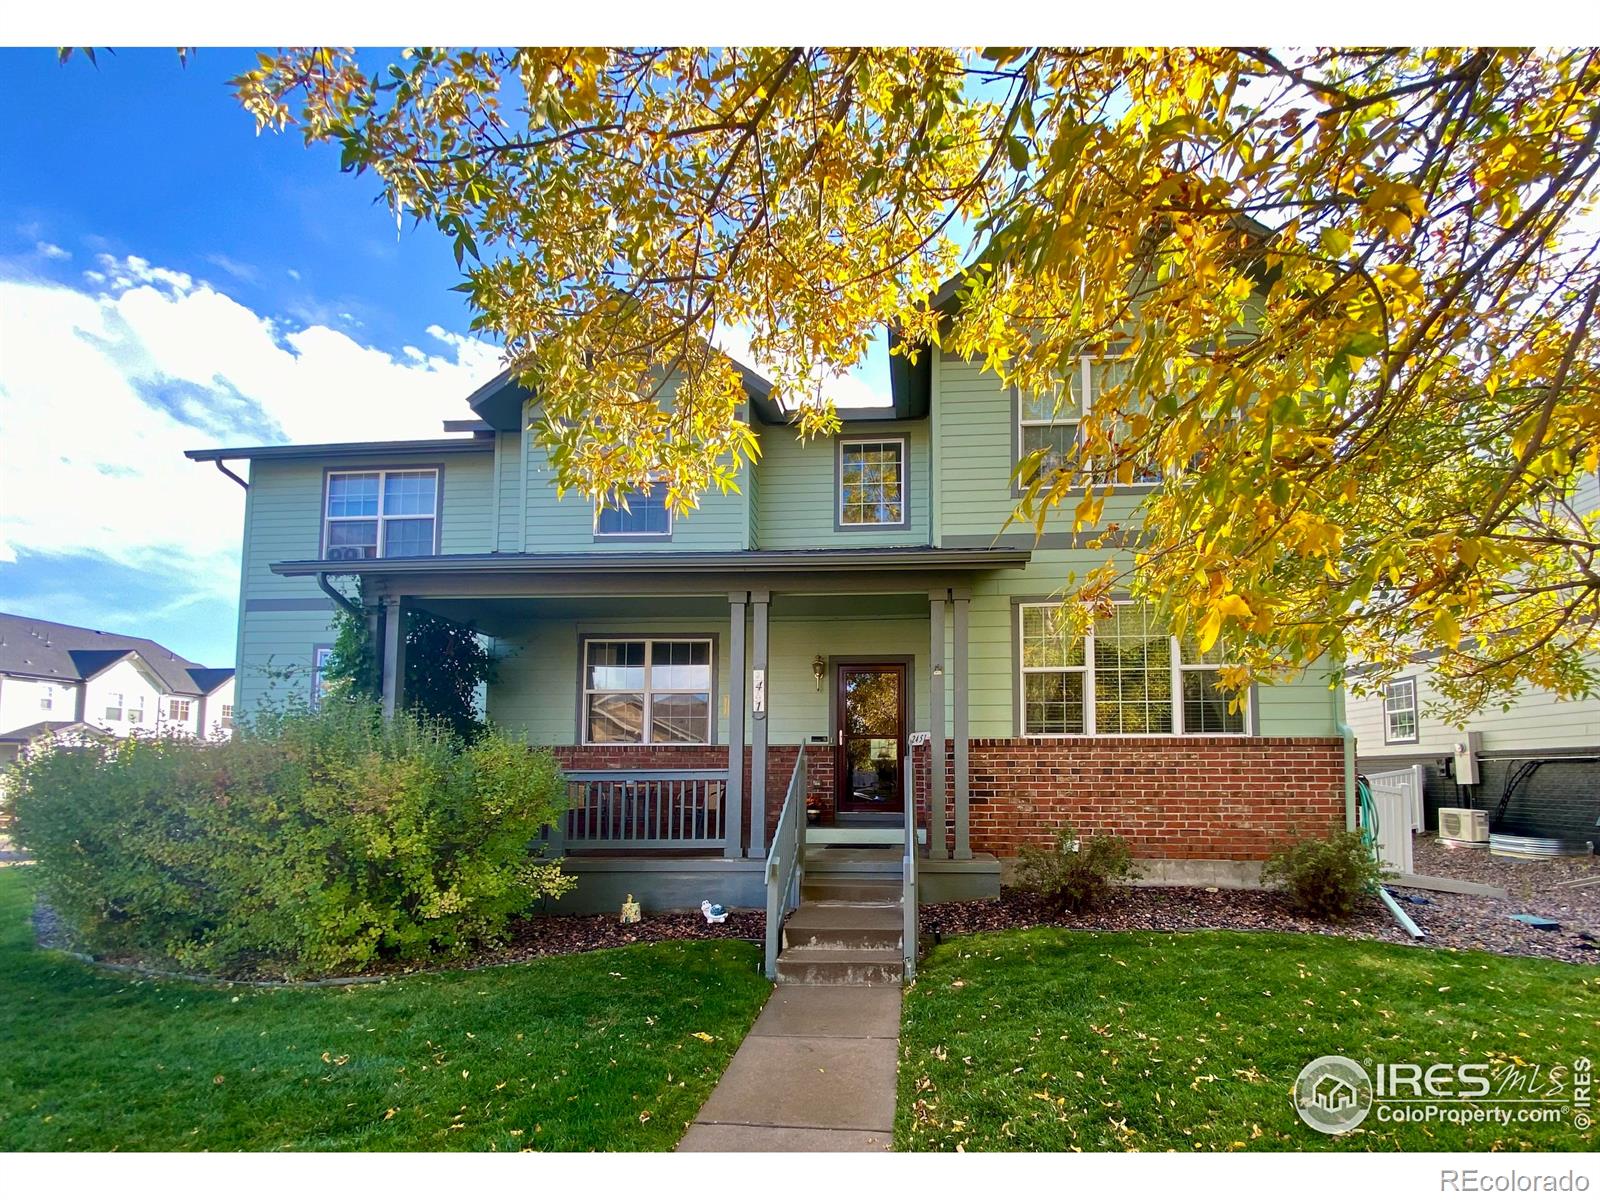 Report Image for 2451  Winding Drive,Longmont, Colorado